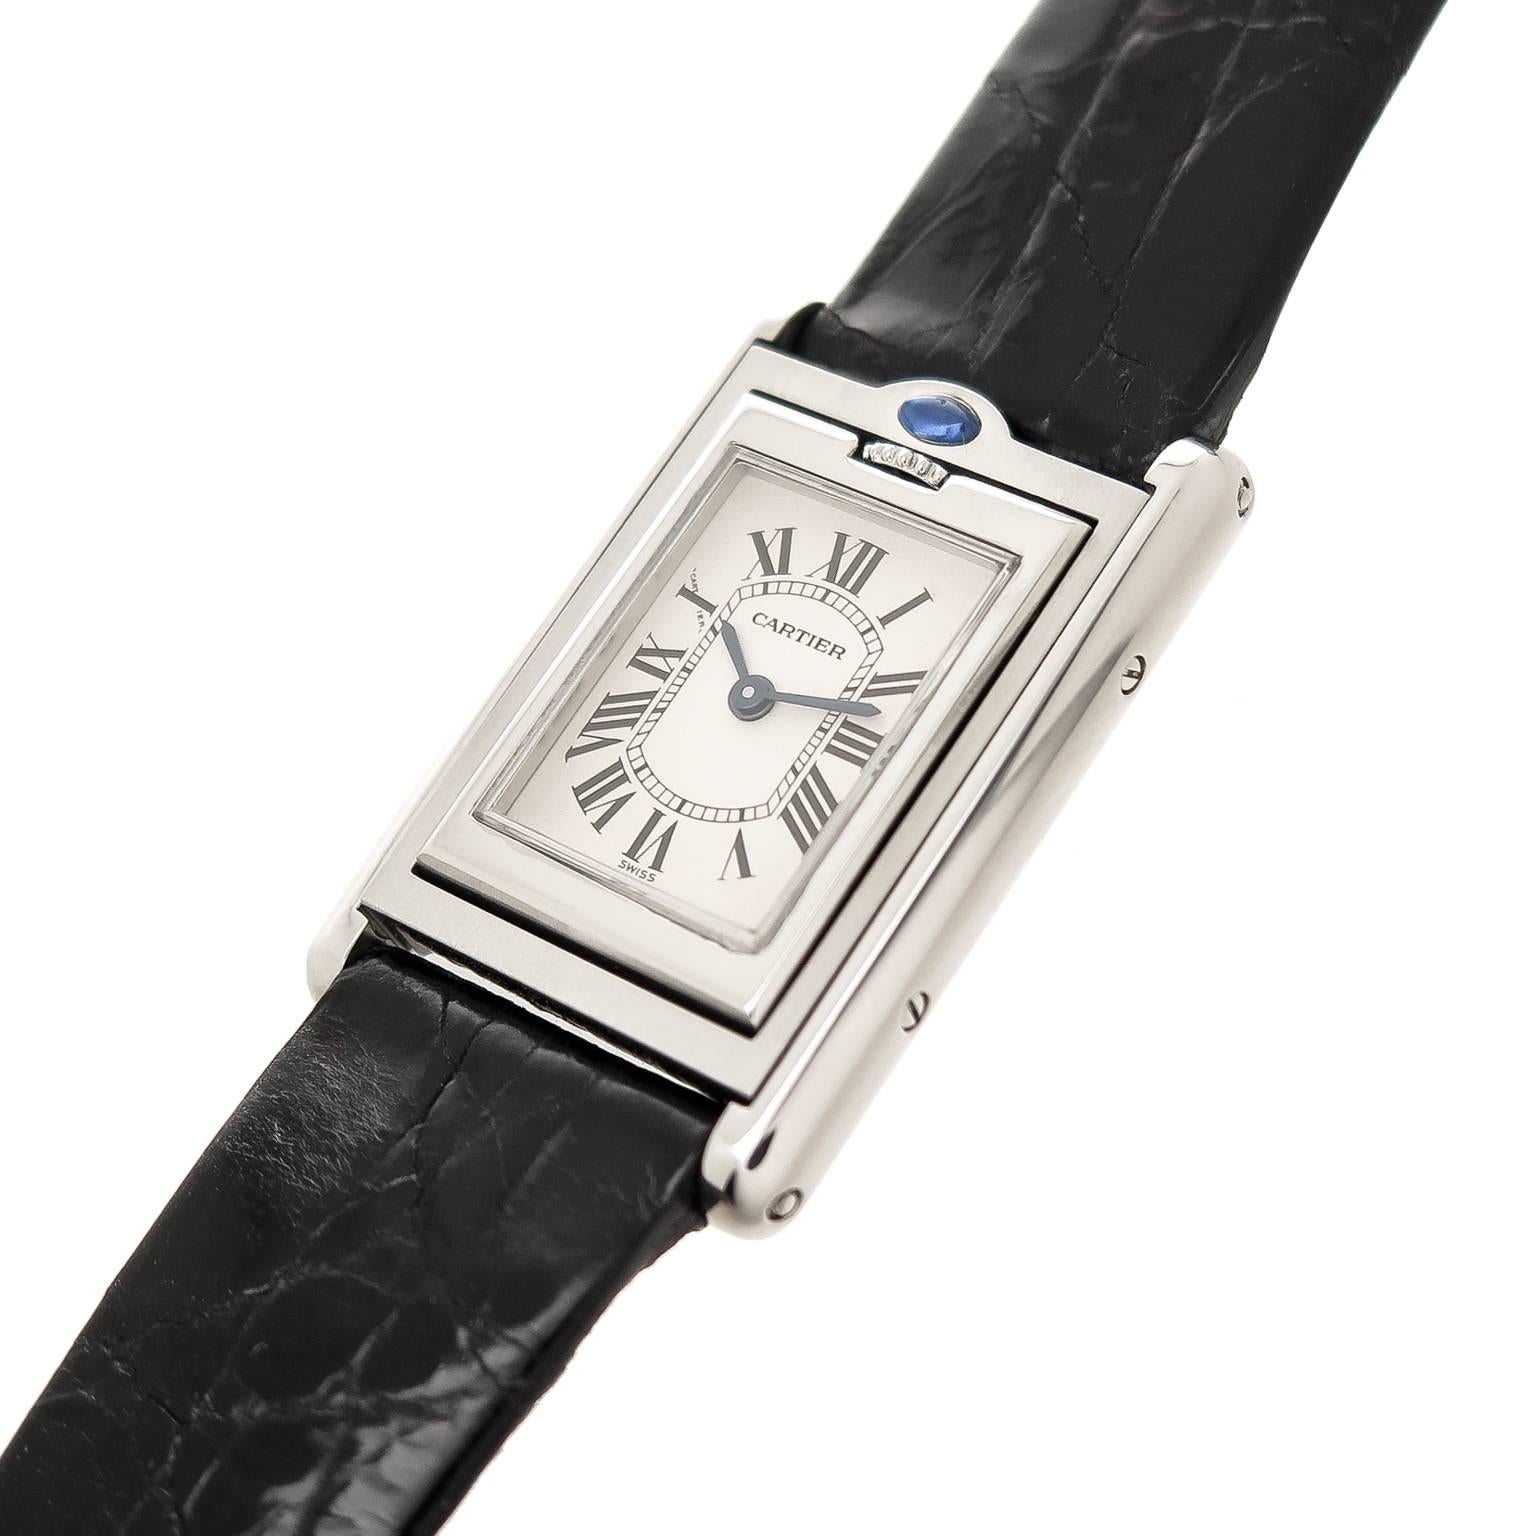 Circa 2010 Cartier, Basculante Reversible Wrist watch, 32 X 22 MM Water resistant Case, Quartz movement, White Dial with Black roman Numerals. New Black Croco Strap with original Cartier tang buckle. Total watch length 8 3/4 inches. Comes with